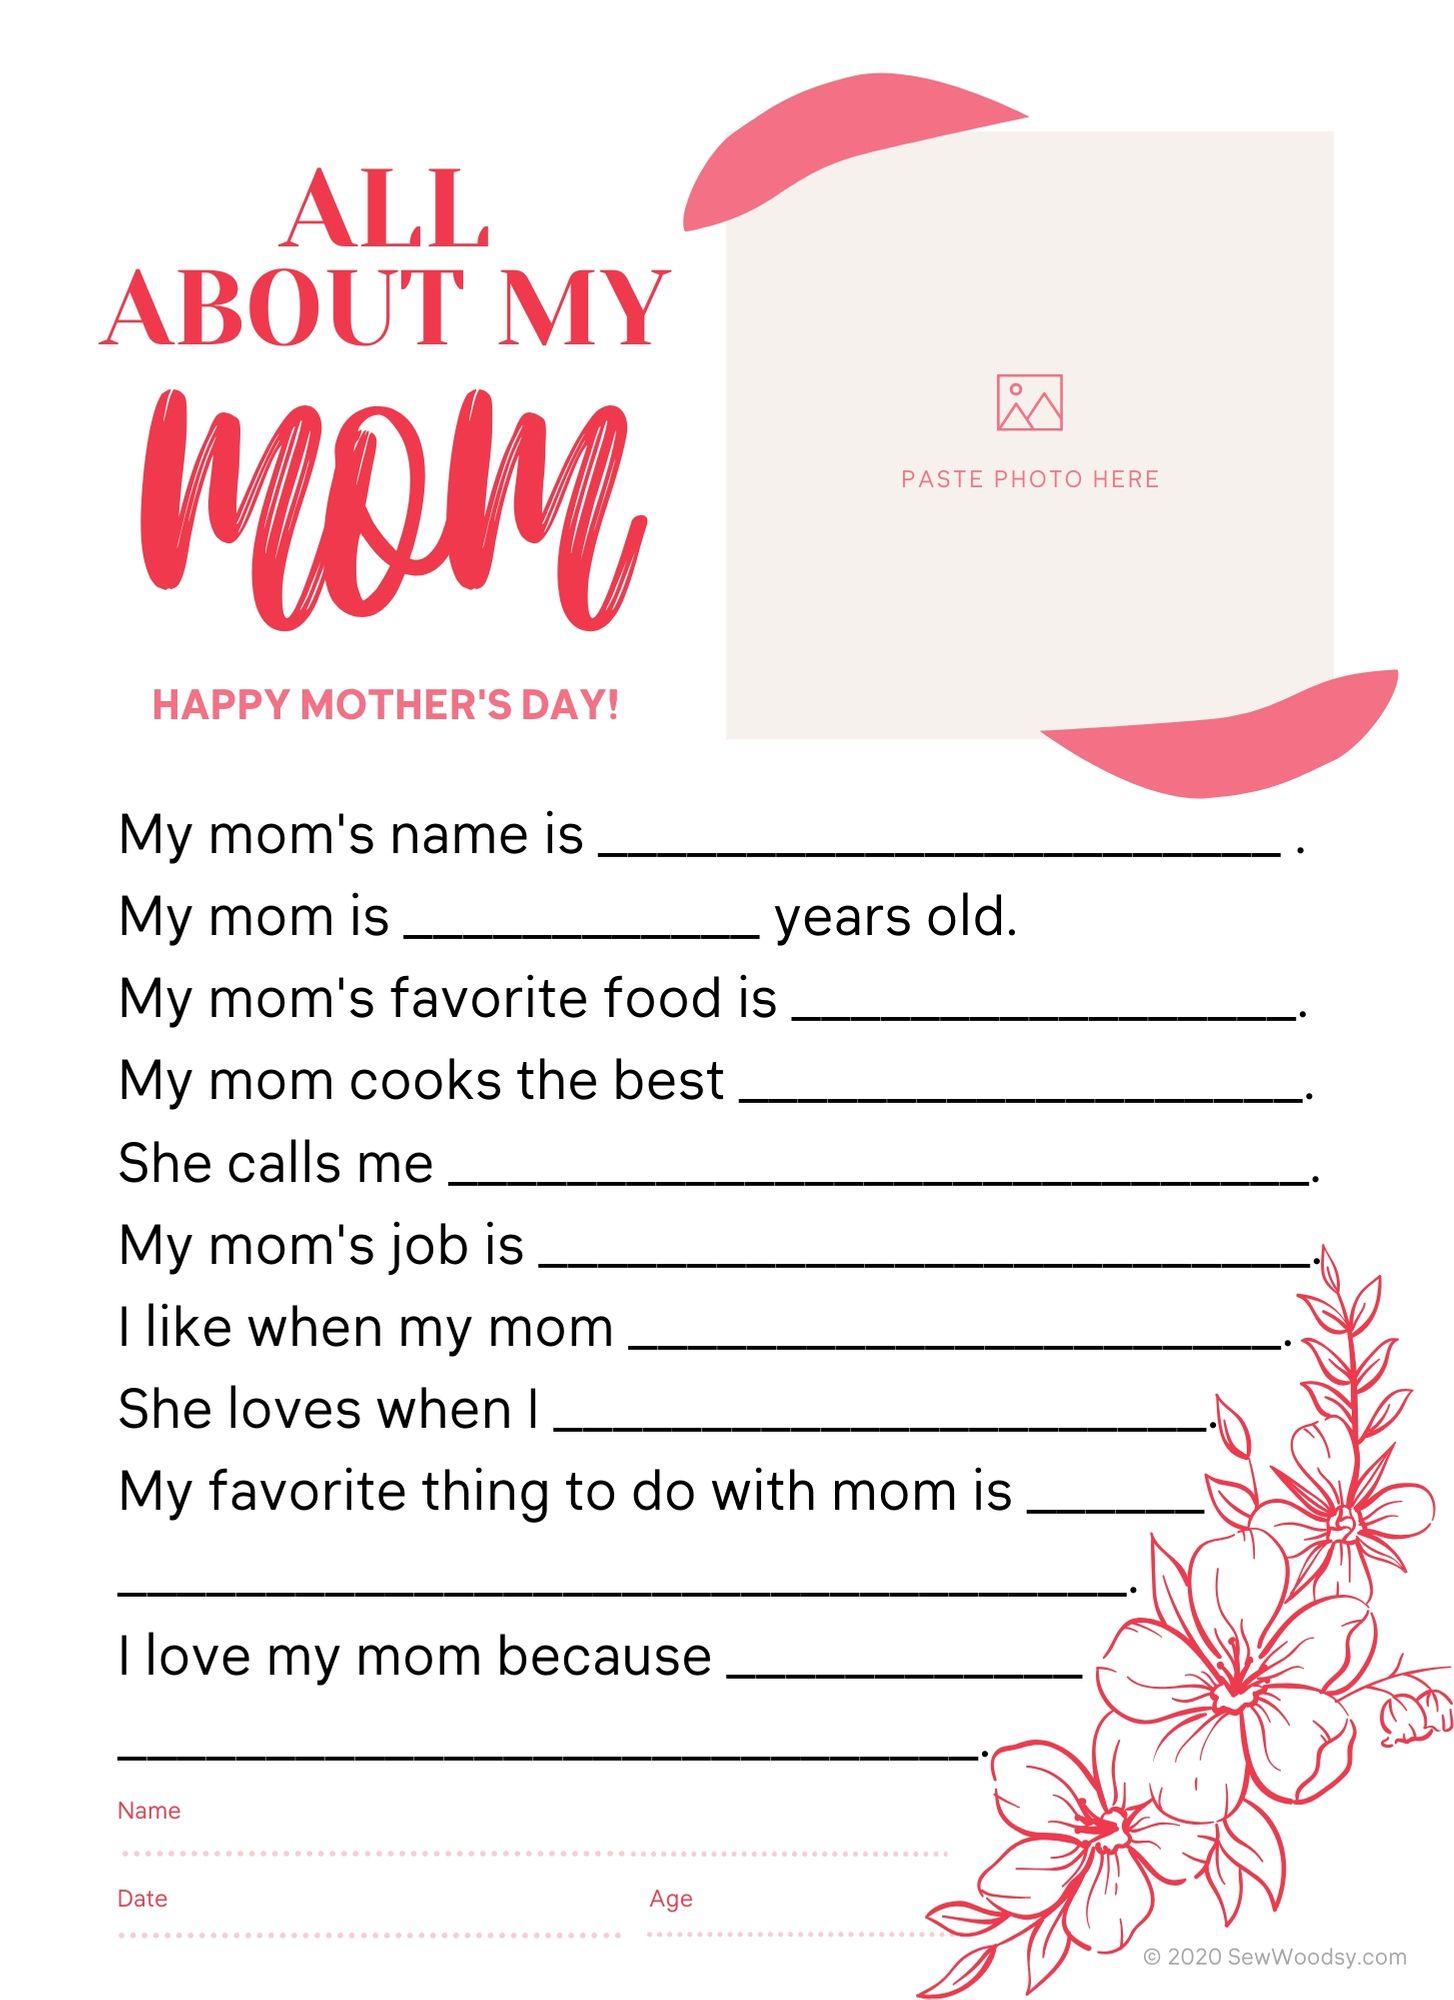 Mother’s Day Questionnaire Printable